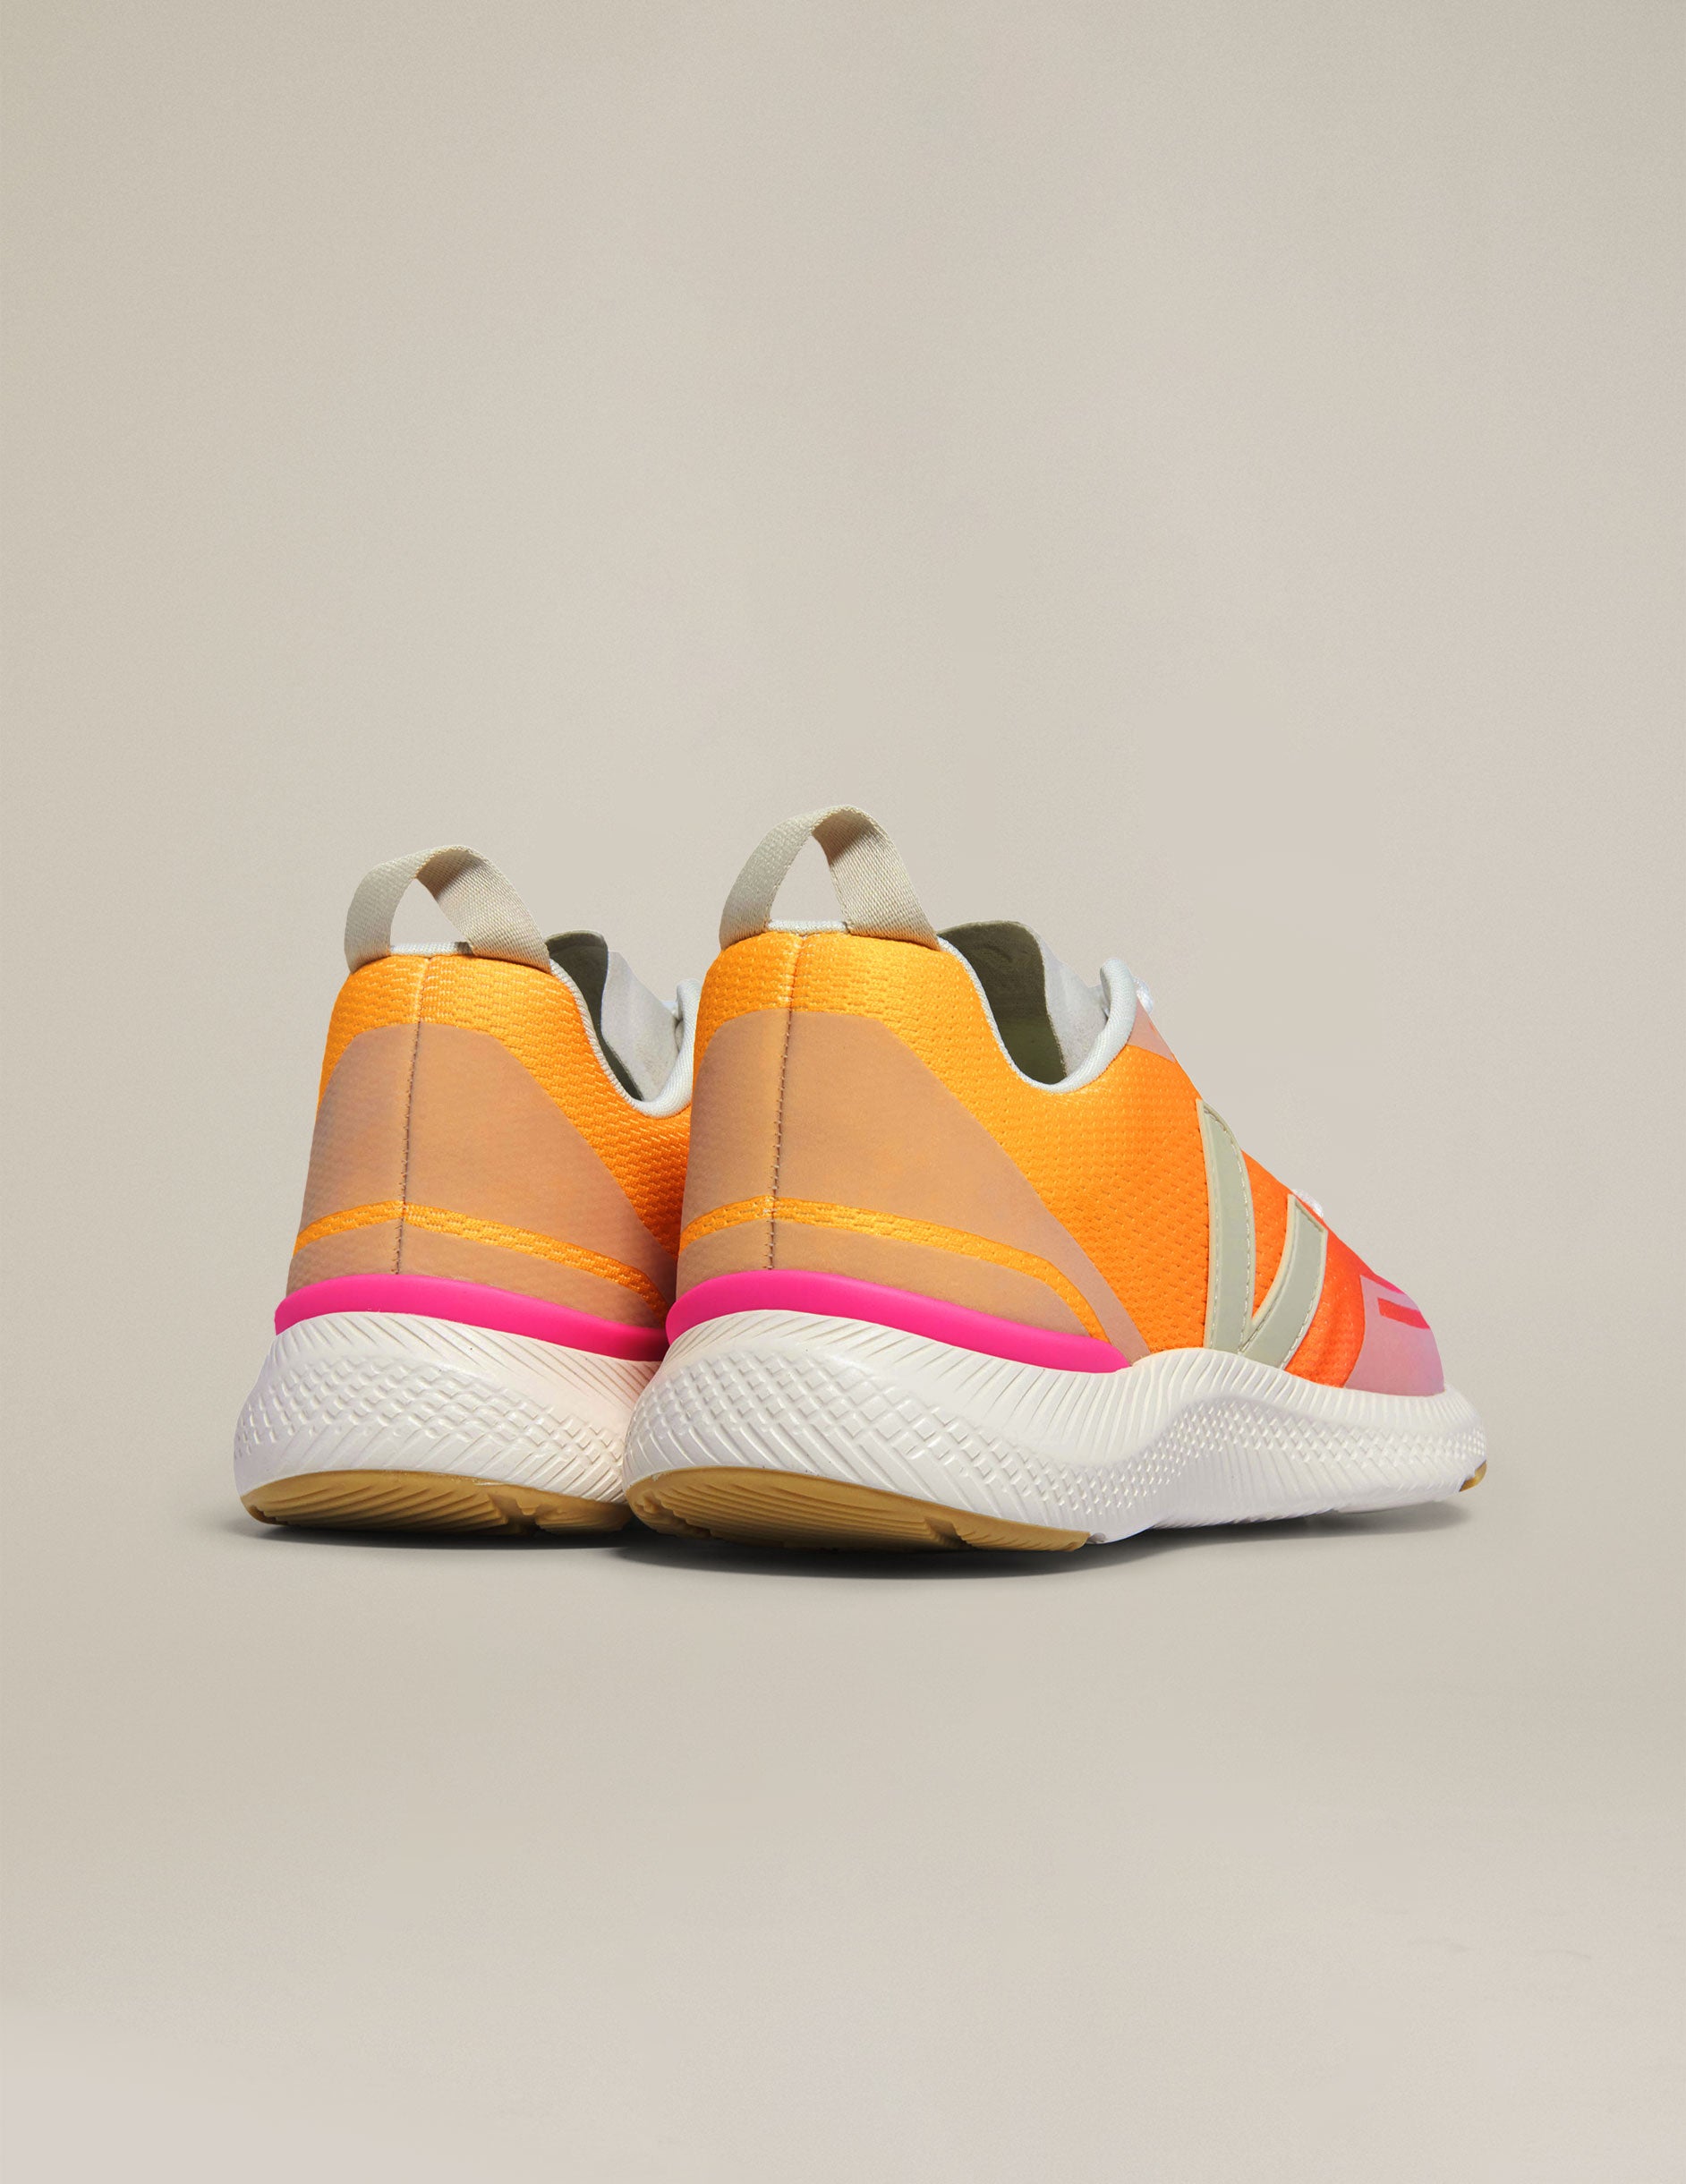 orange and pink lace up sneakers from Veja.